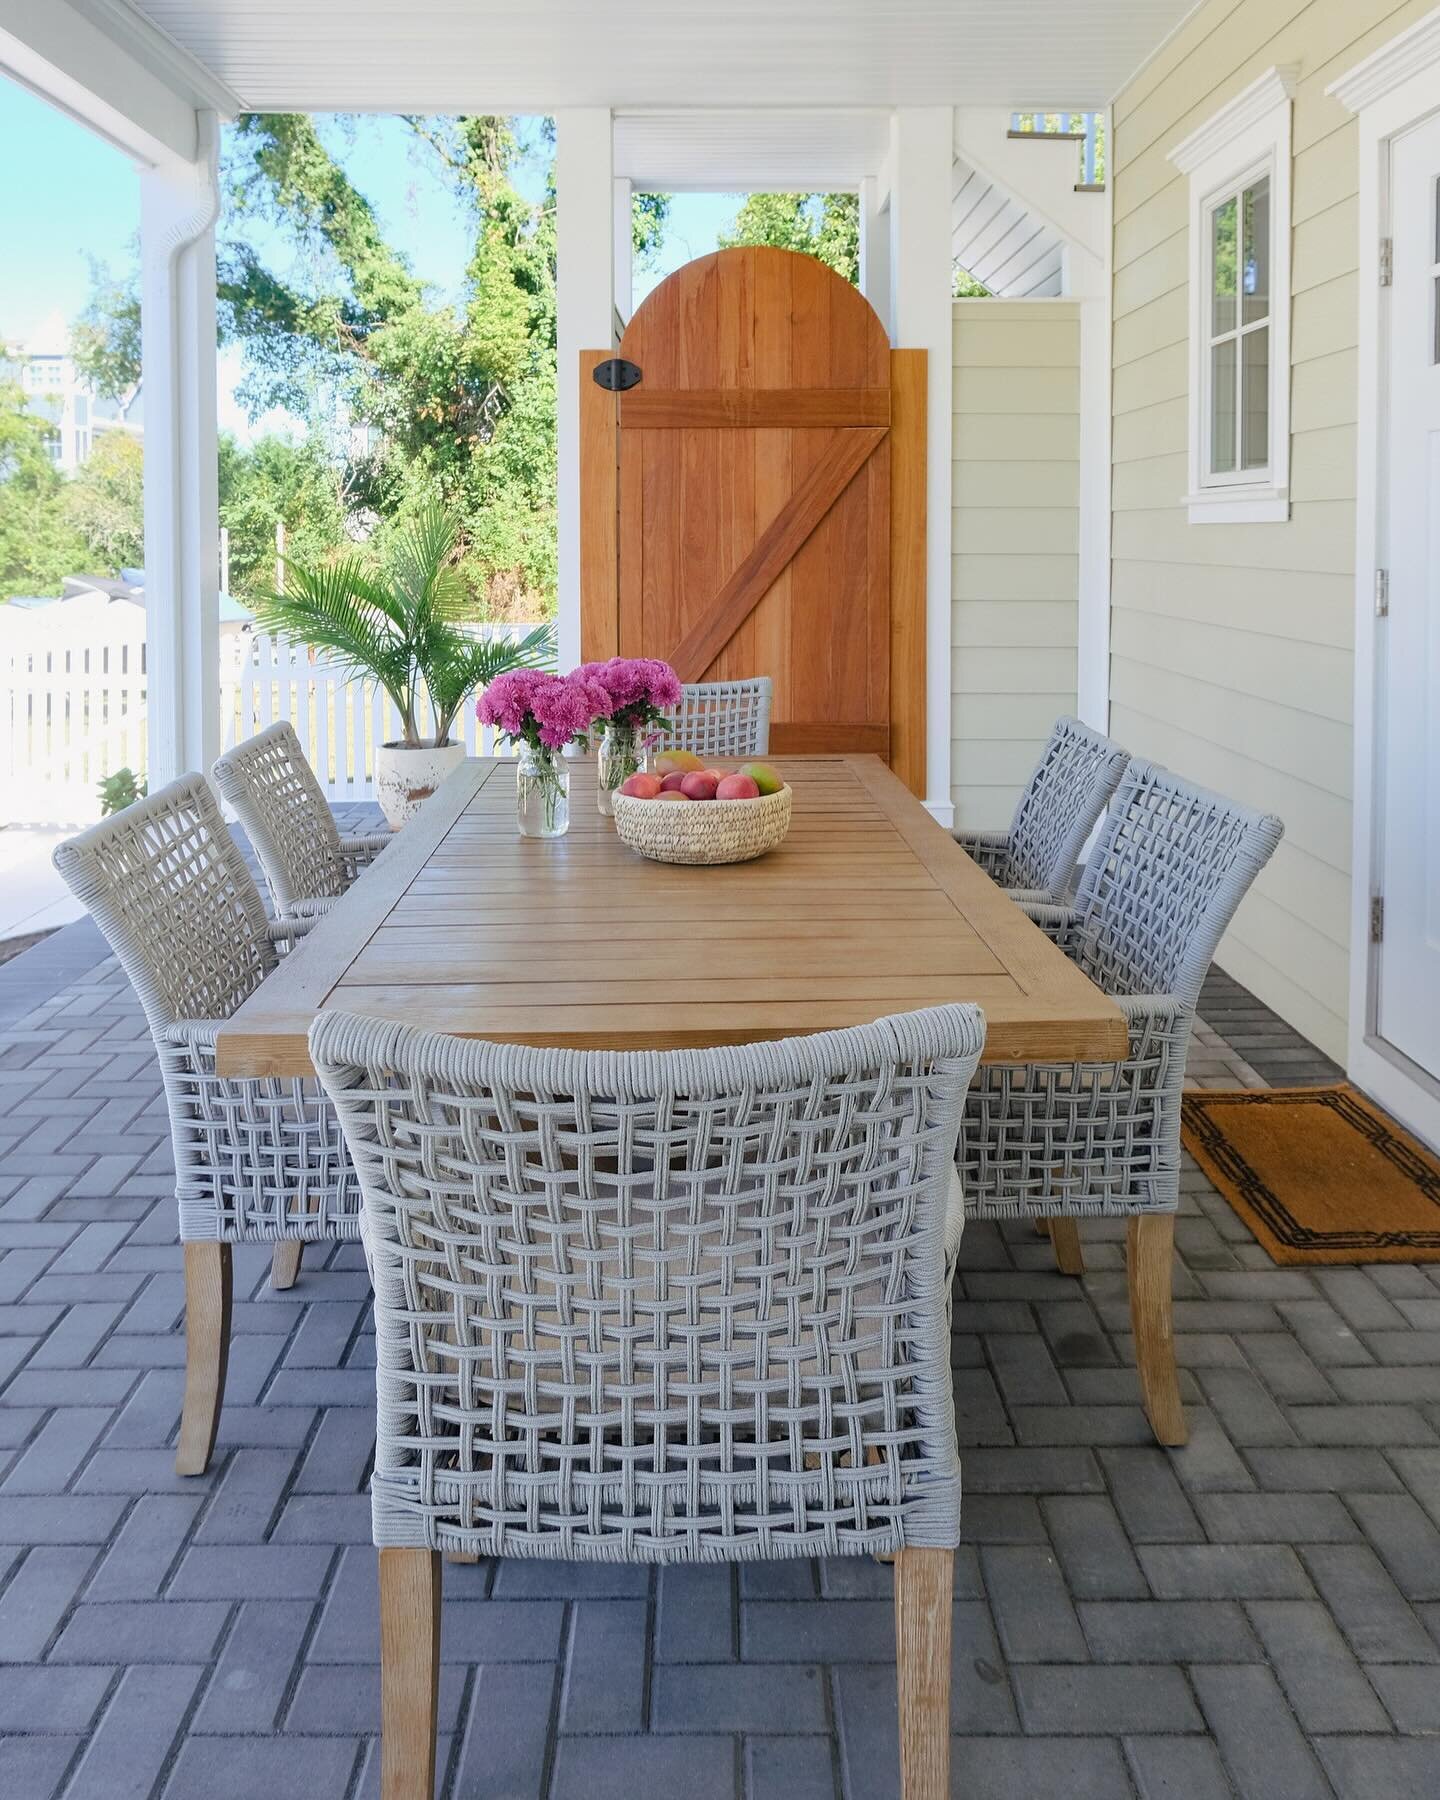 In honor of the warm weather we&rsquo;ve been having I thought I&rsquo;d share some of the outdoor spaces I designed in Cape May. Summer can&rsquo;t come soon enough! Photo credit @natbirdphoto